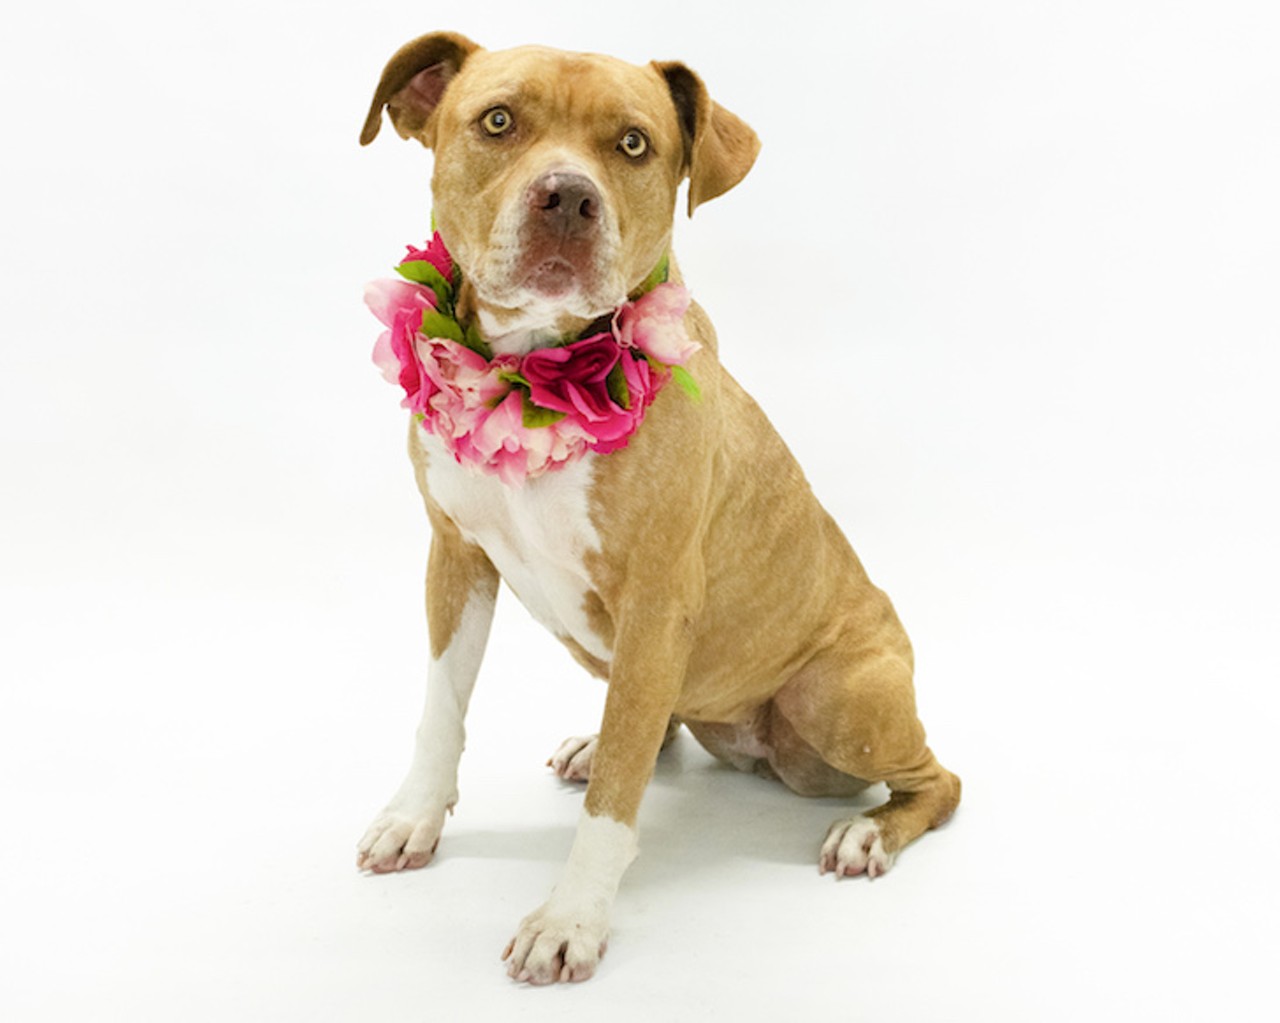 20 adoptable Orlando County dogs looking for a new sweetheart